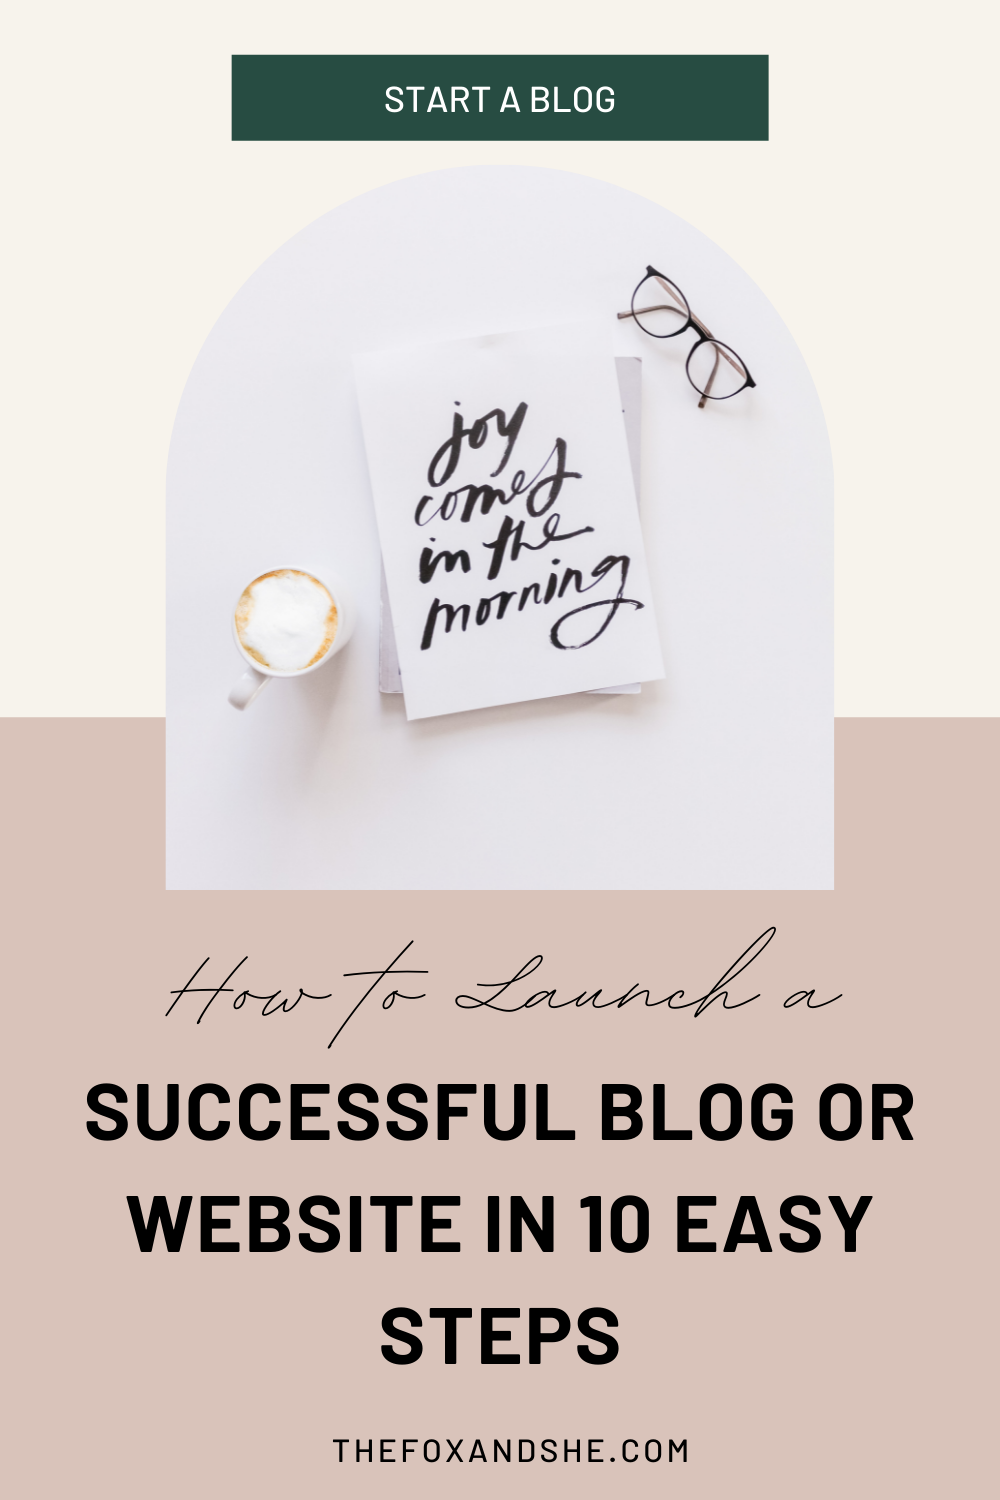 How to Launch a Successful Blog or Website in 10 Easy Steps